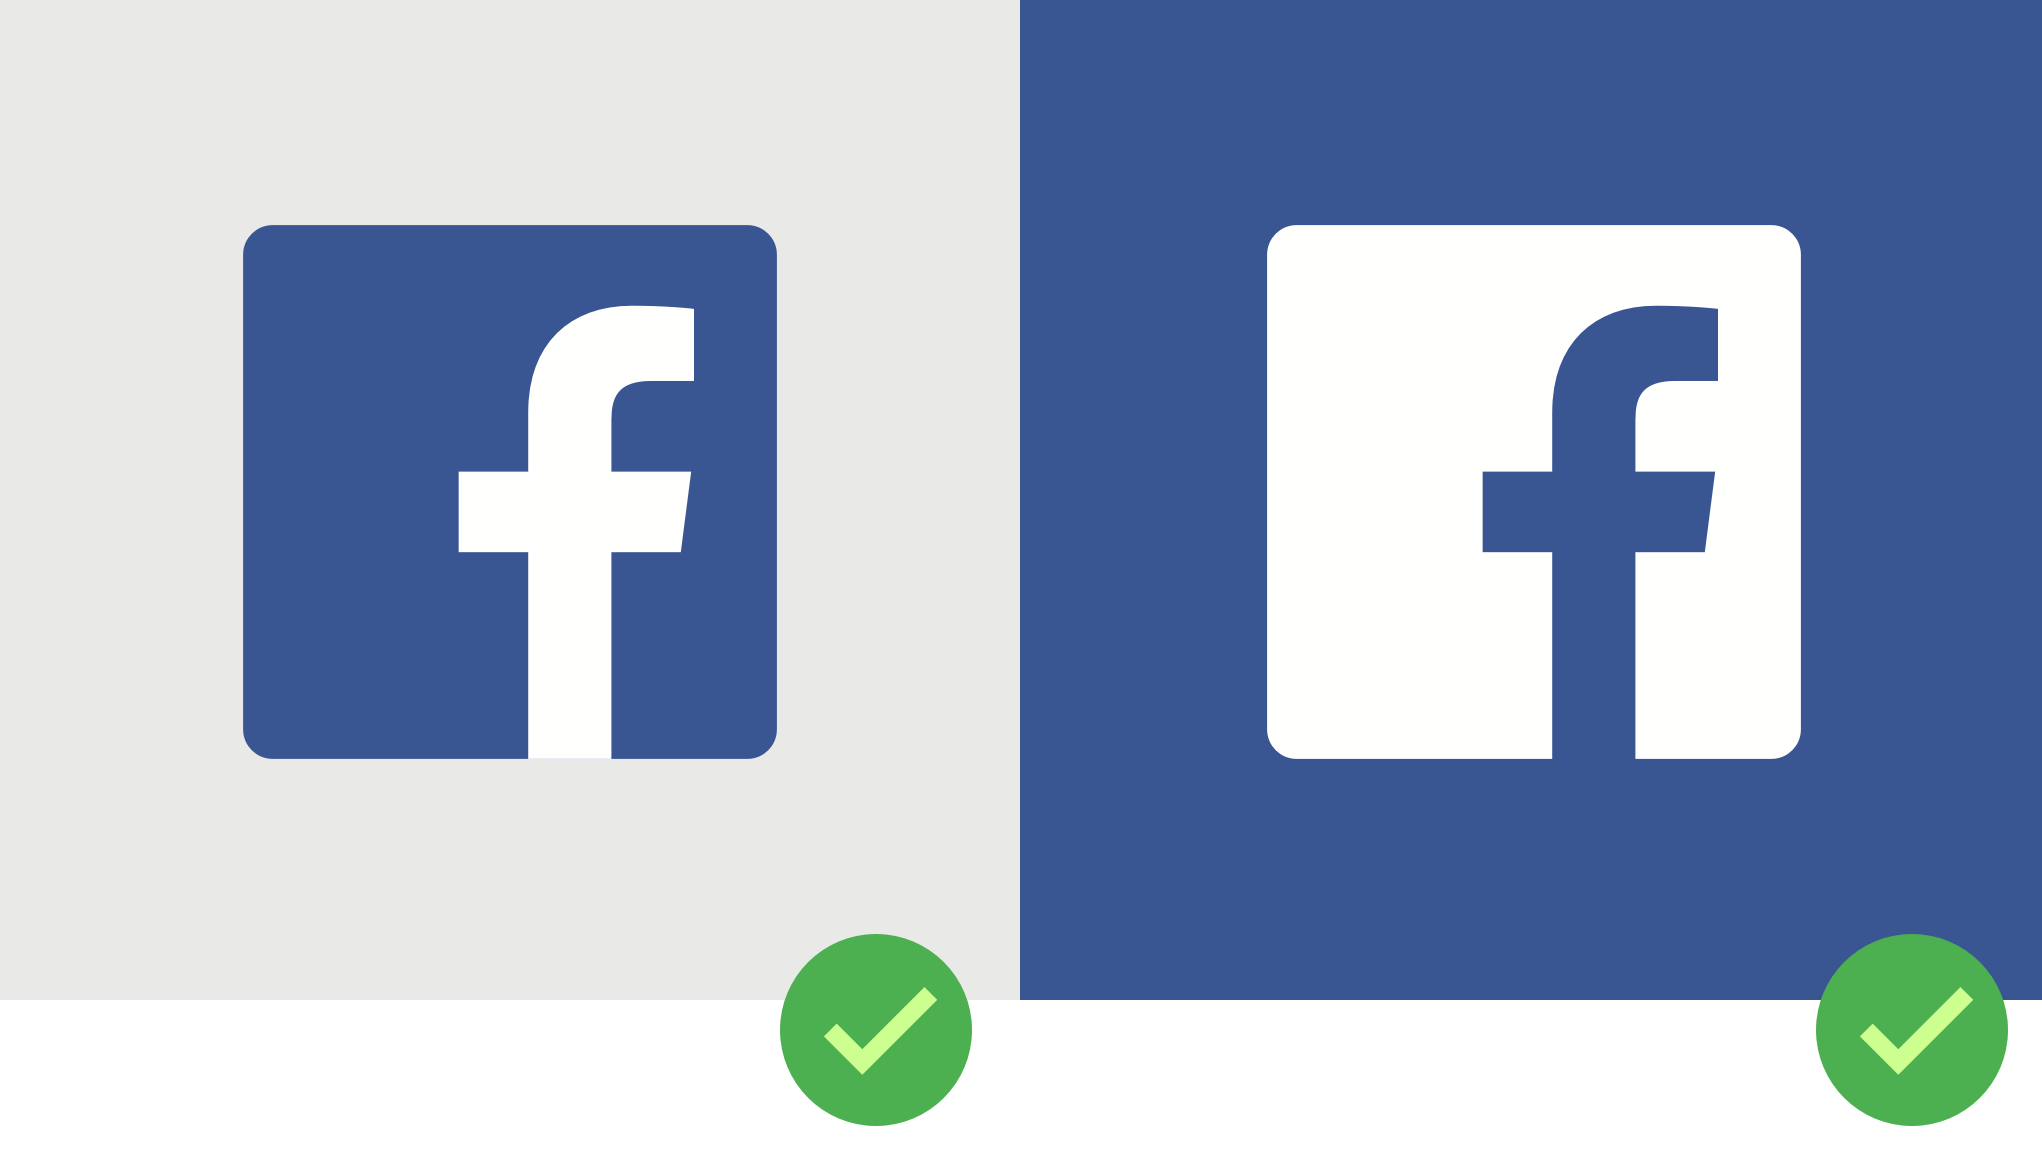 Fecabook Logo - Facebook Logo Icon Png #326395 - Free Icons Library